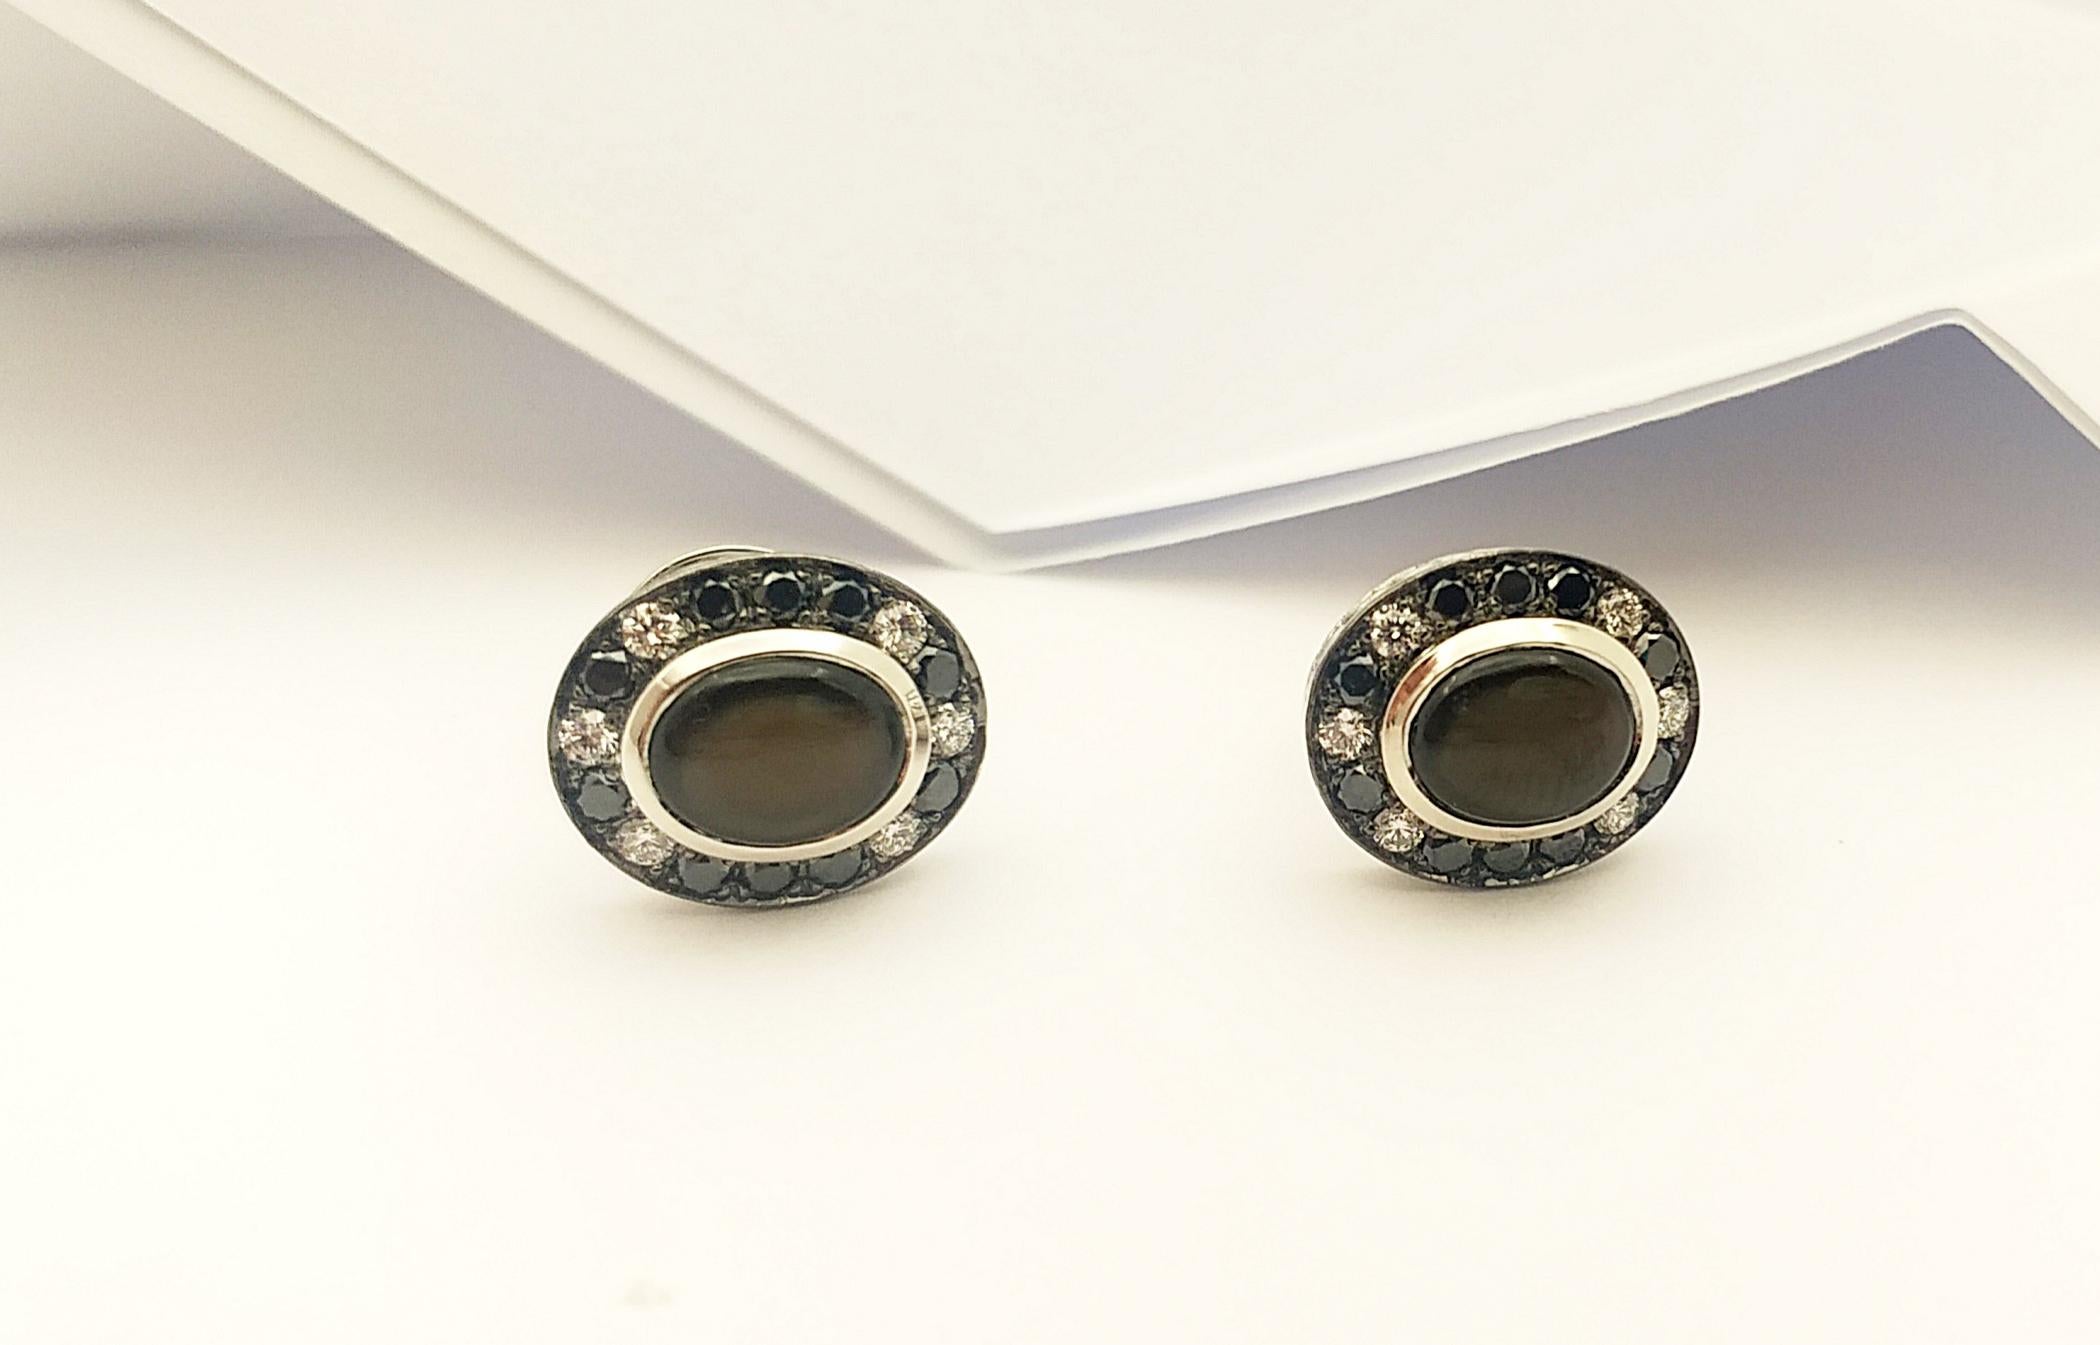 Cabochon Black Star Sapphire, Brown Diamond with Diamond Earrings in 18 Karat White Gold For Sale